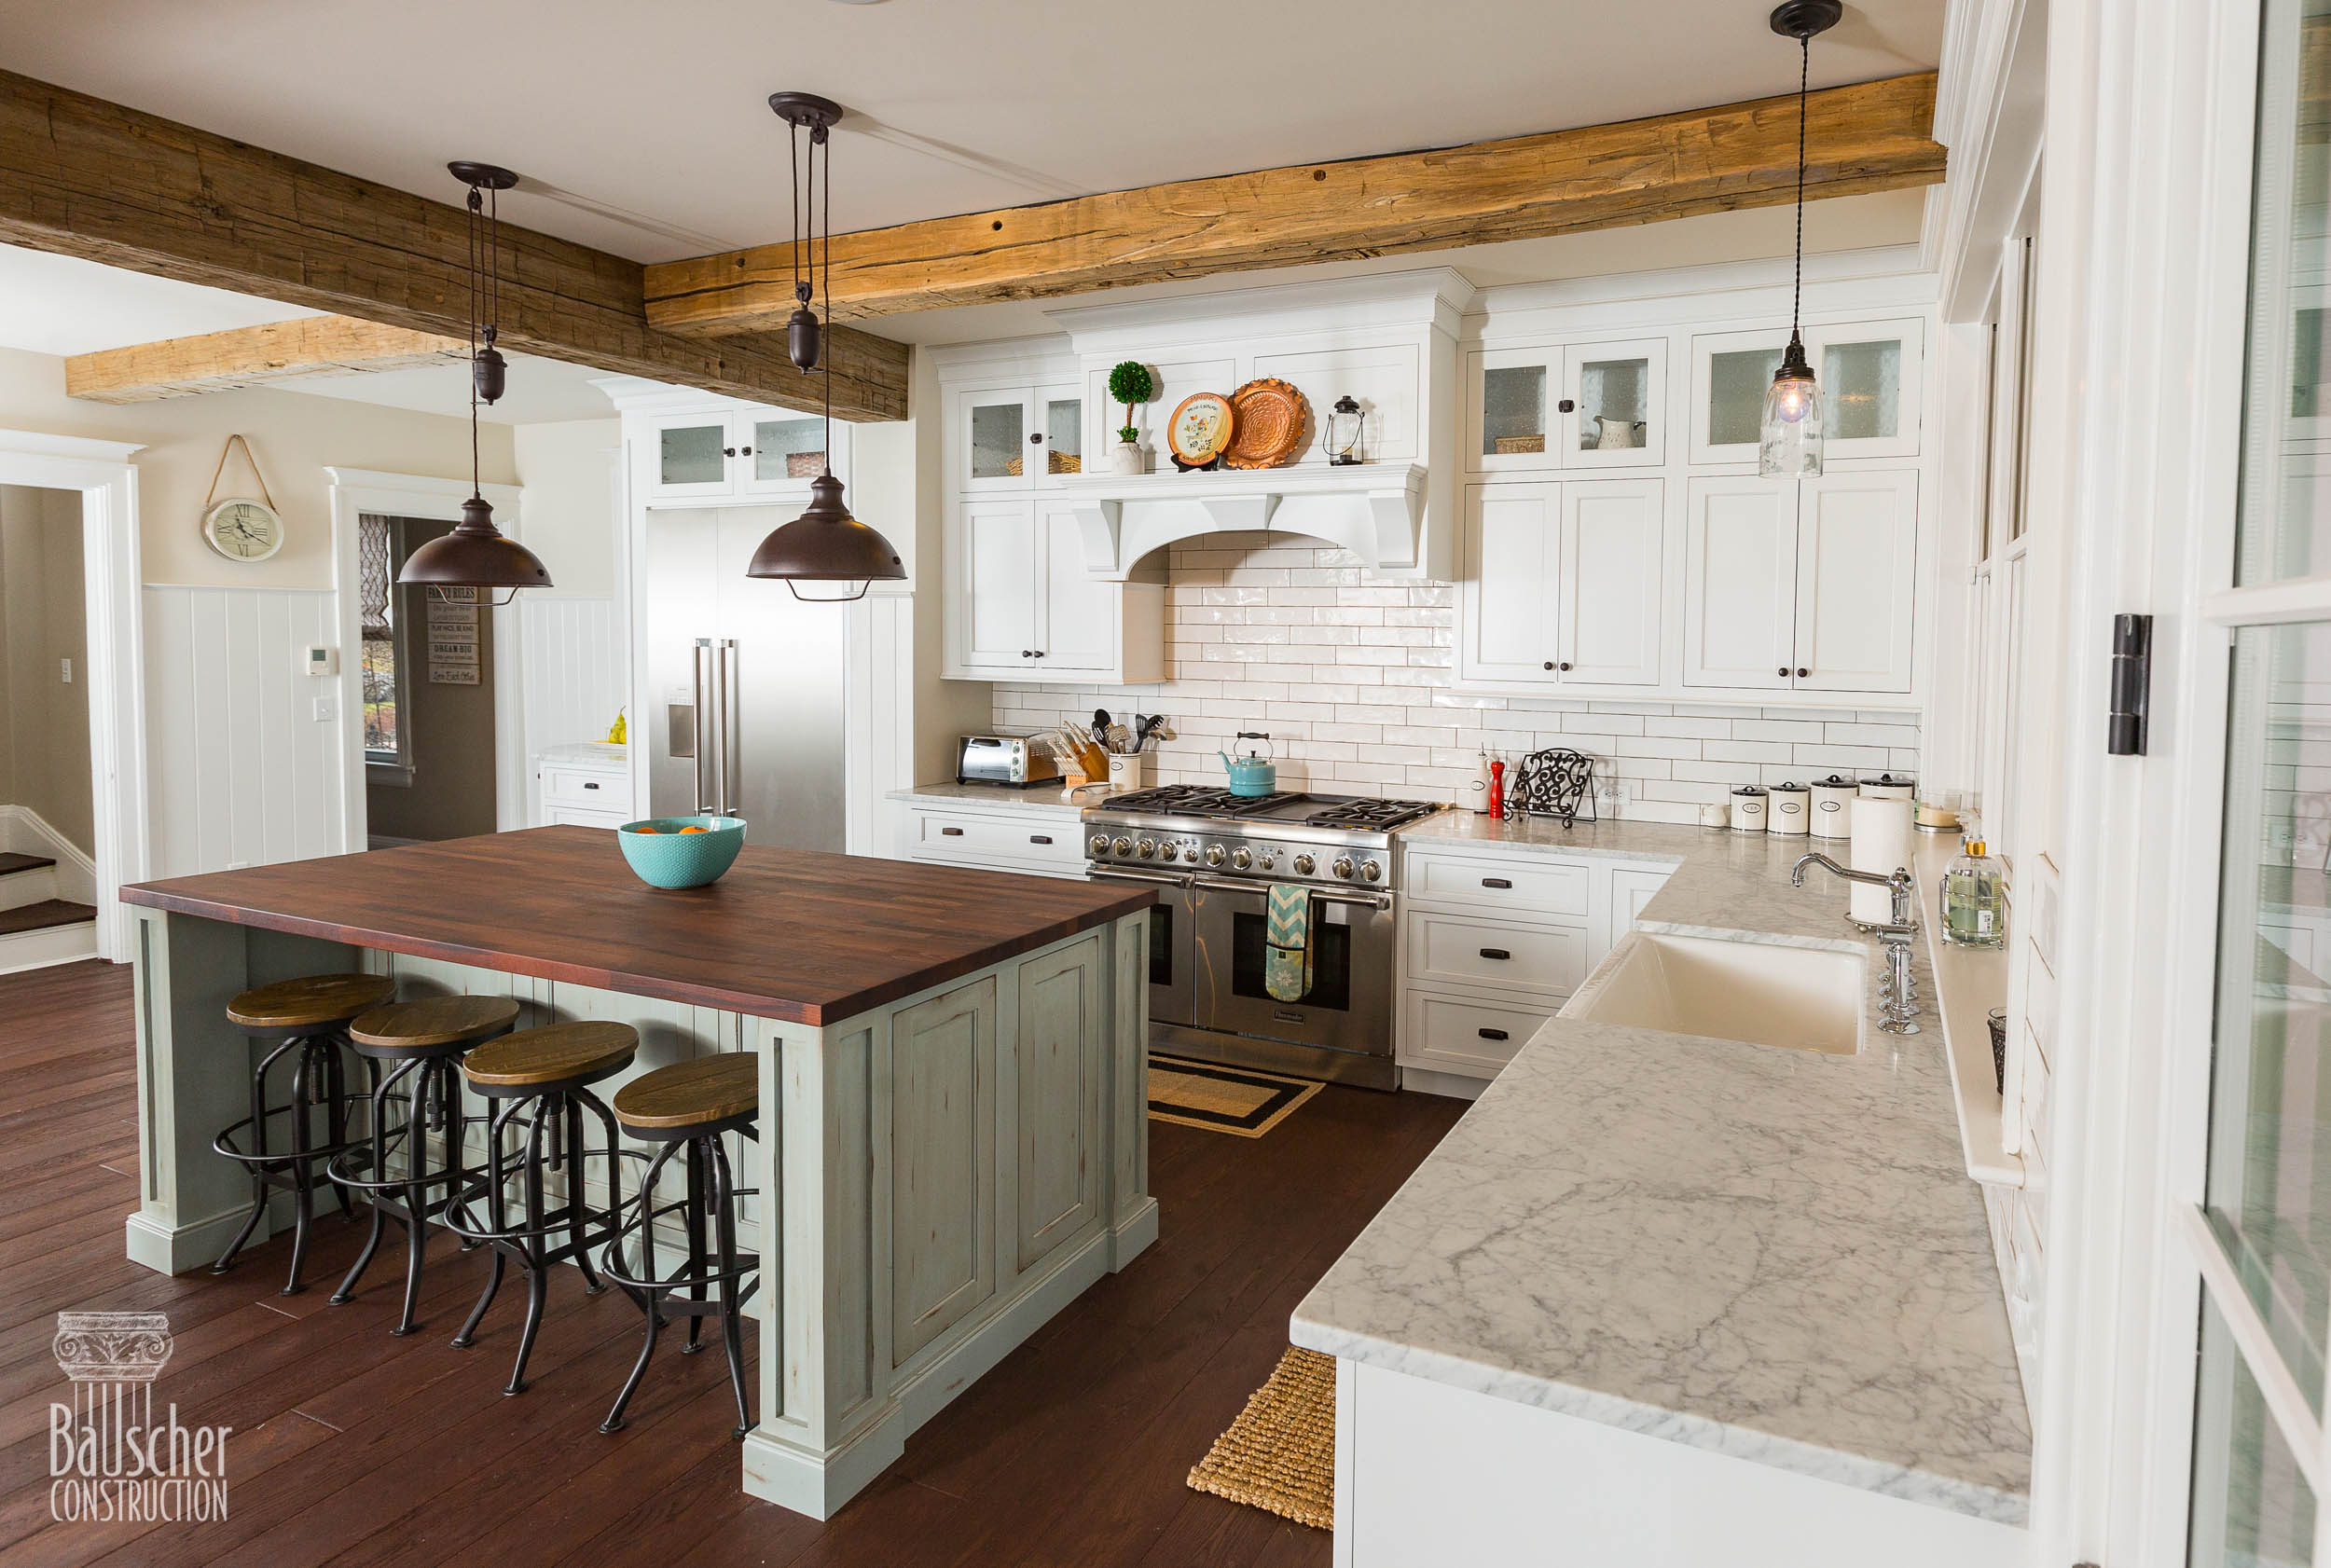 Designing a farmhouse kitchen: 13 ideas that are brimming with character